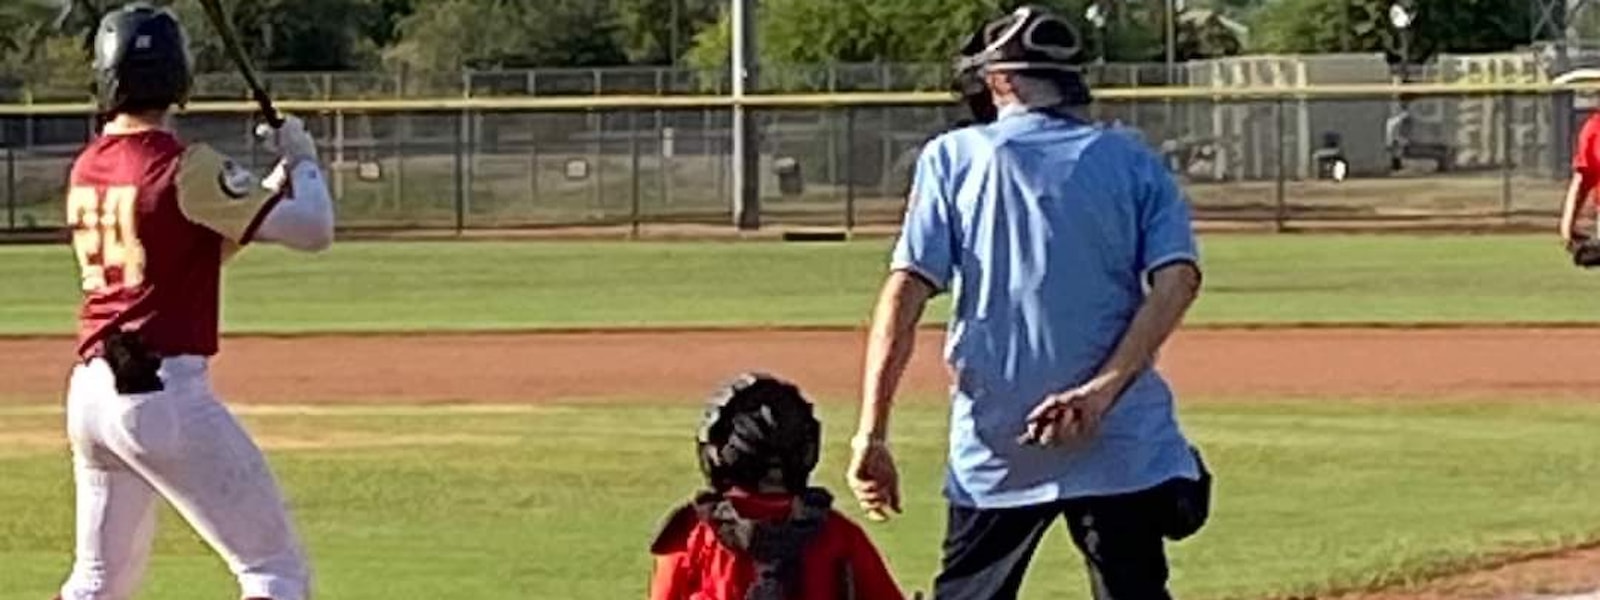 Boy playing catcher kneeling by umpire while a player is at bat